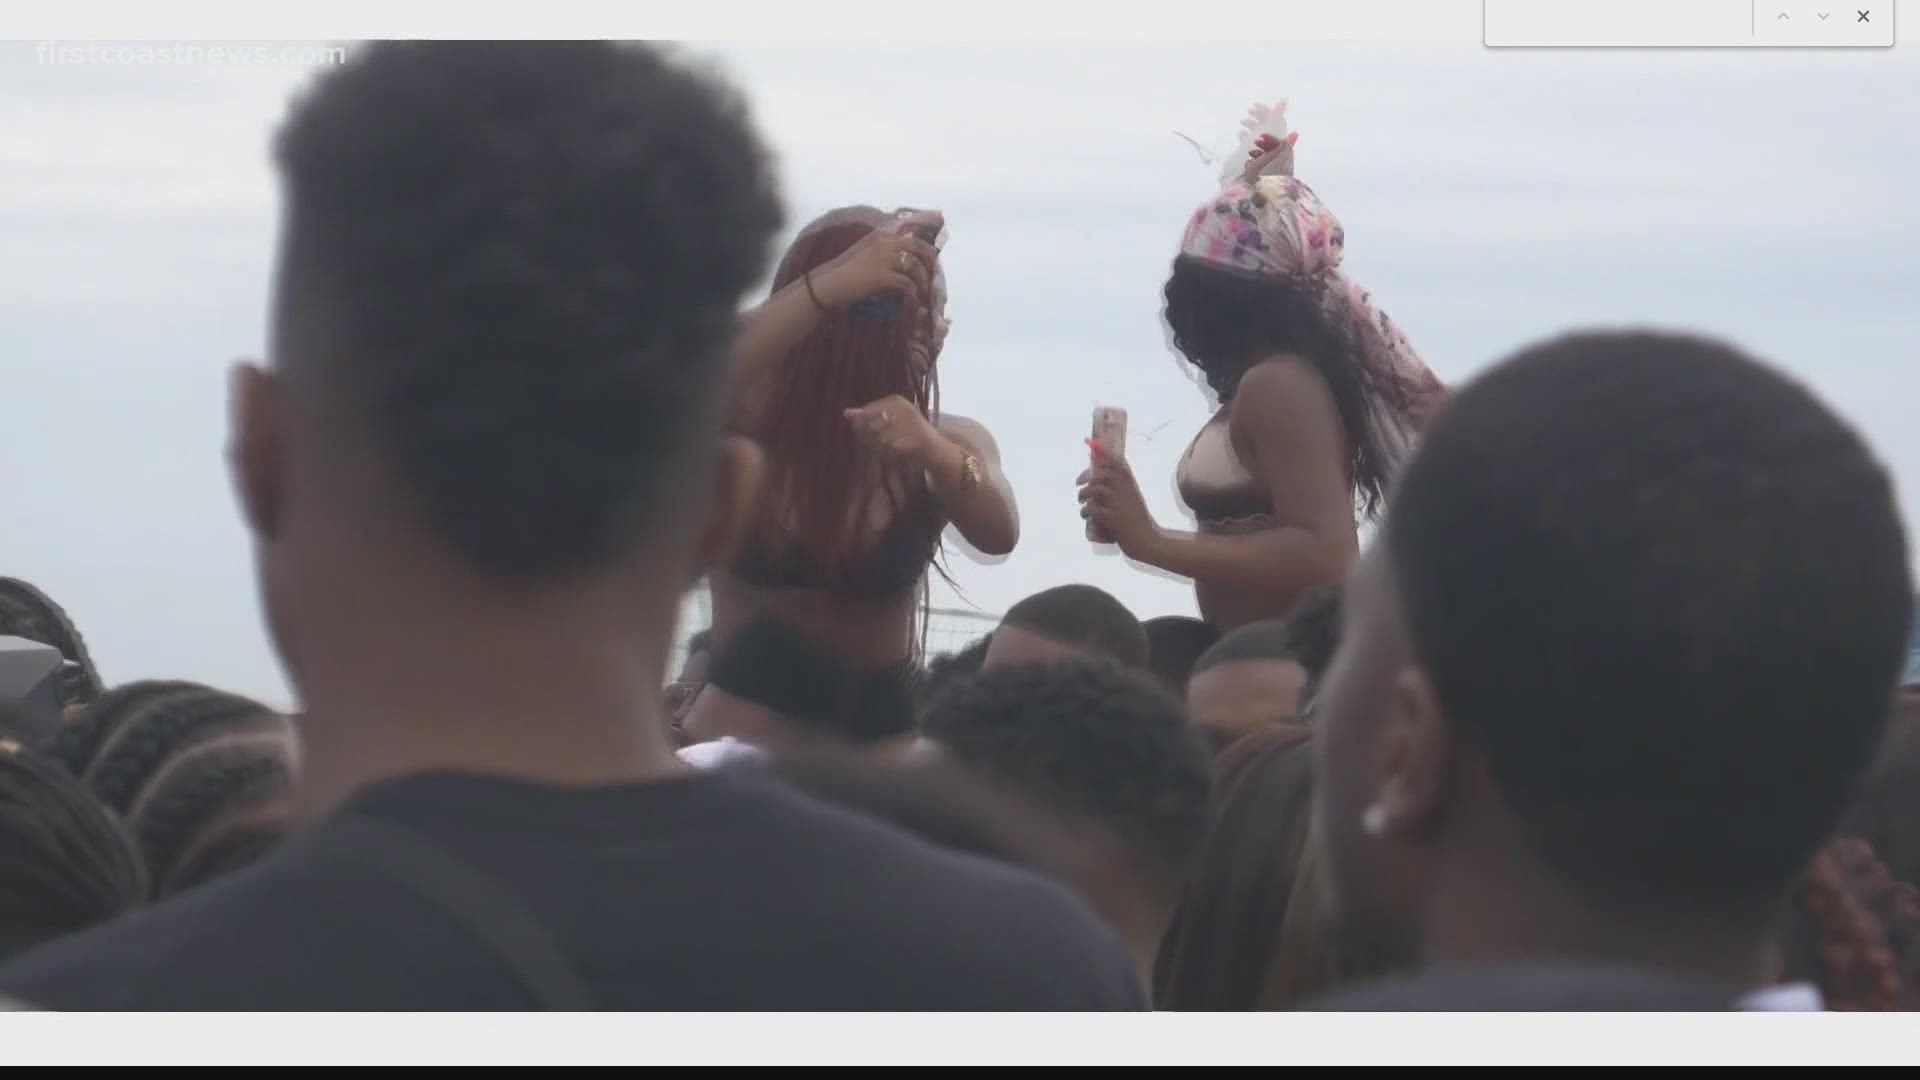 The festival is a loosely organized beach weekend that draws a largely Black college-age crowd. The event's Facebook page promotes it as the biggest beach festival.